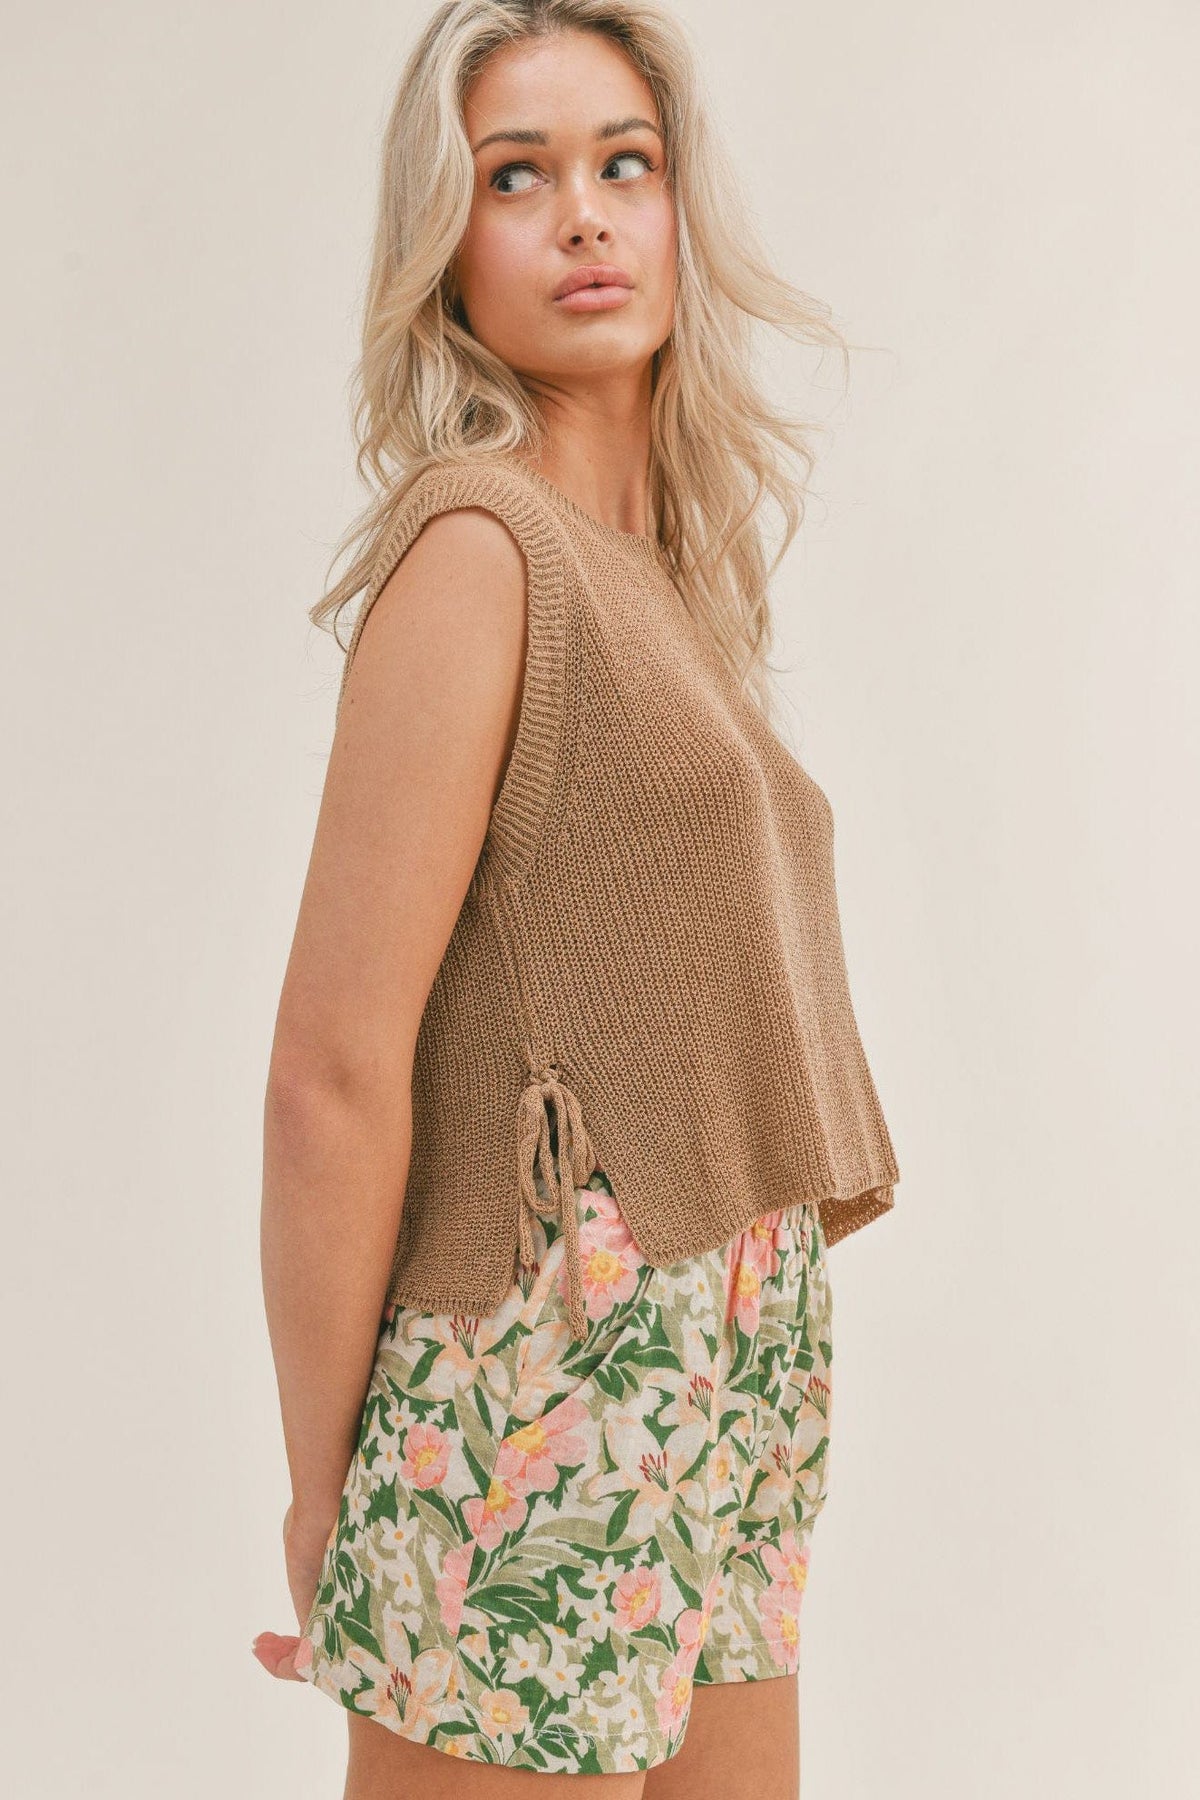 Sage The Label Mariposa Side Tie Sleeveless Sweater - Shirts &amp; Tops - Blooming Daily